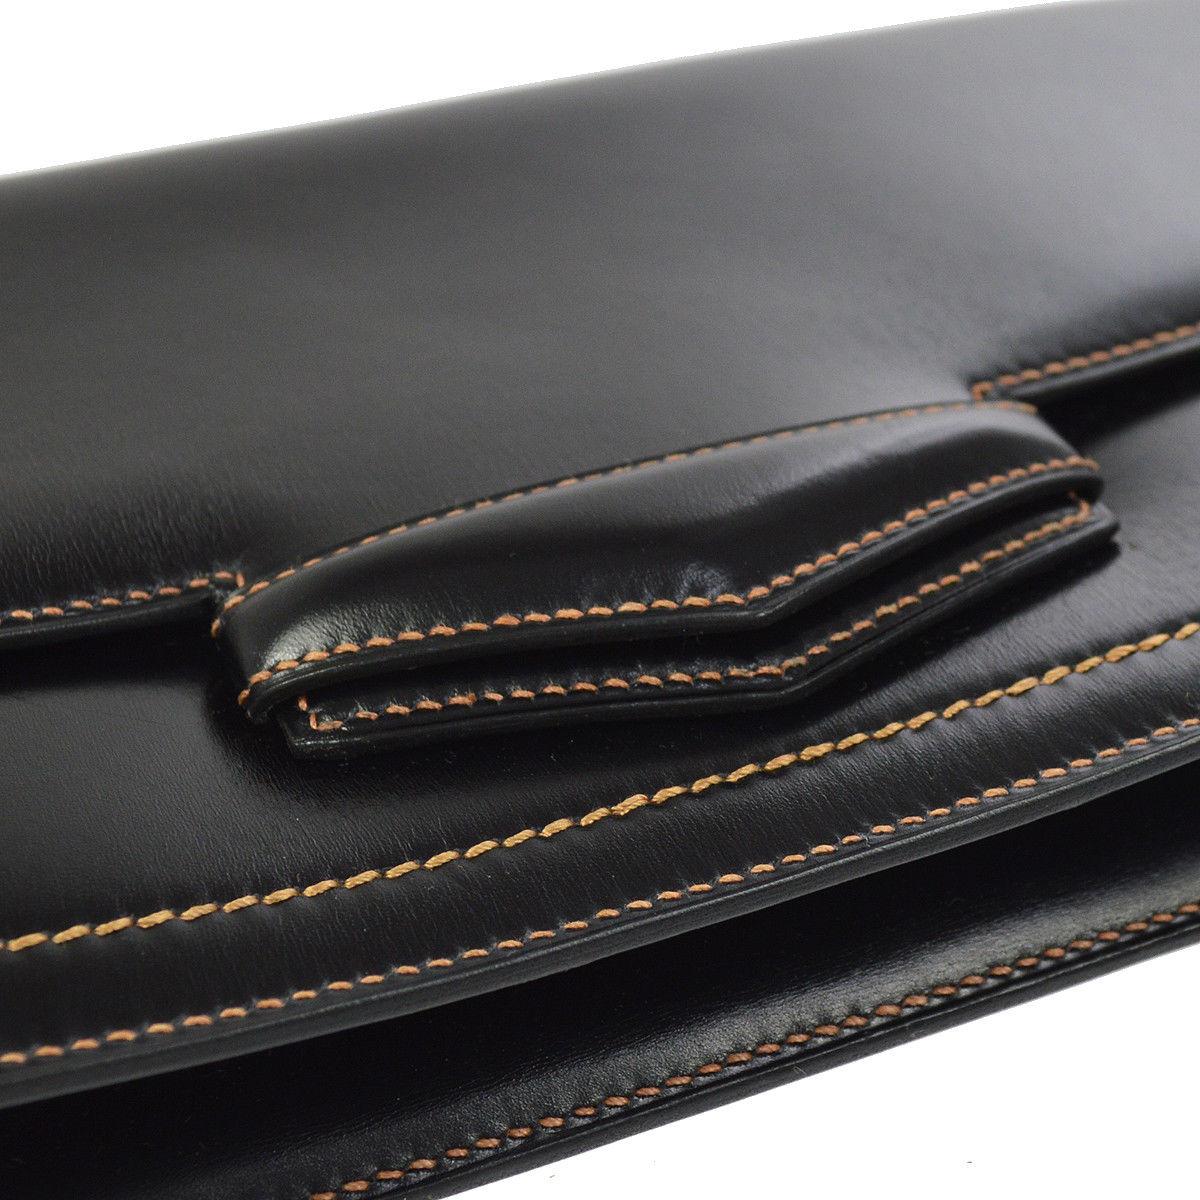 Hermes Leather Black Whipstitch Evening Envelope Fold in Flap Clutch Bag

Leather
Leather lining
Made in France
Date code present
Measures 10.5